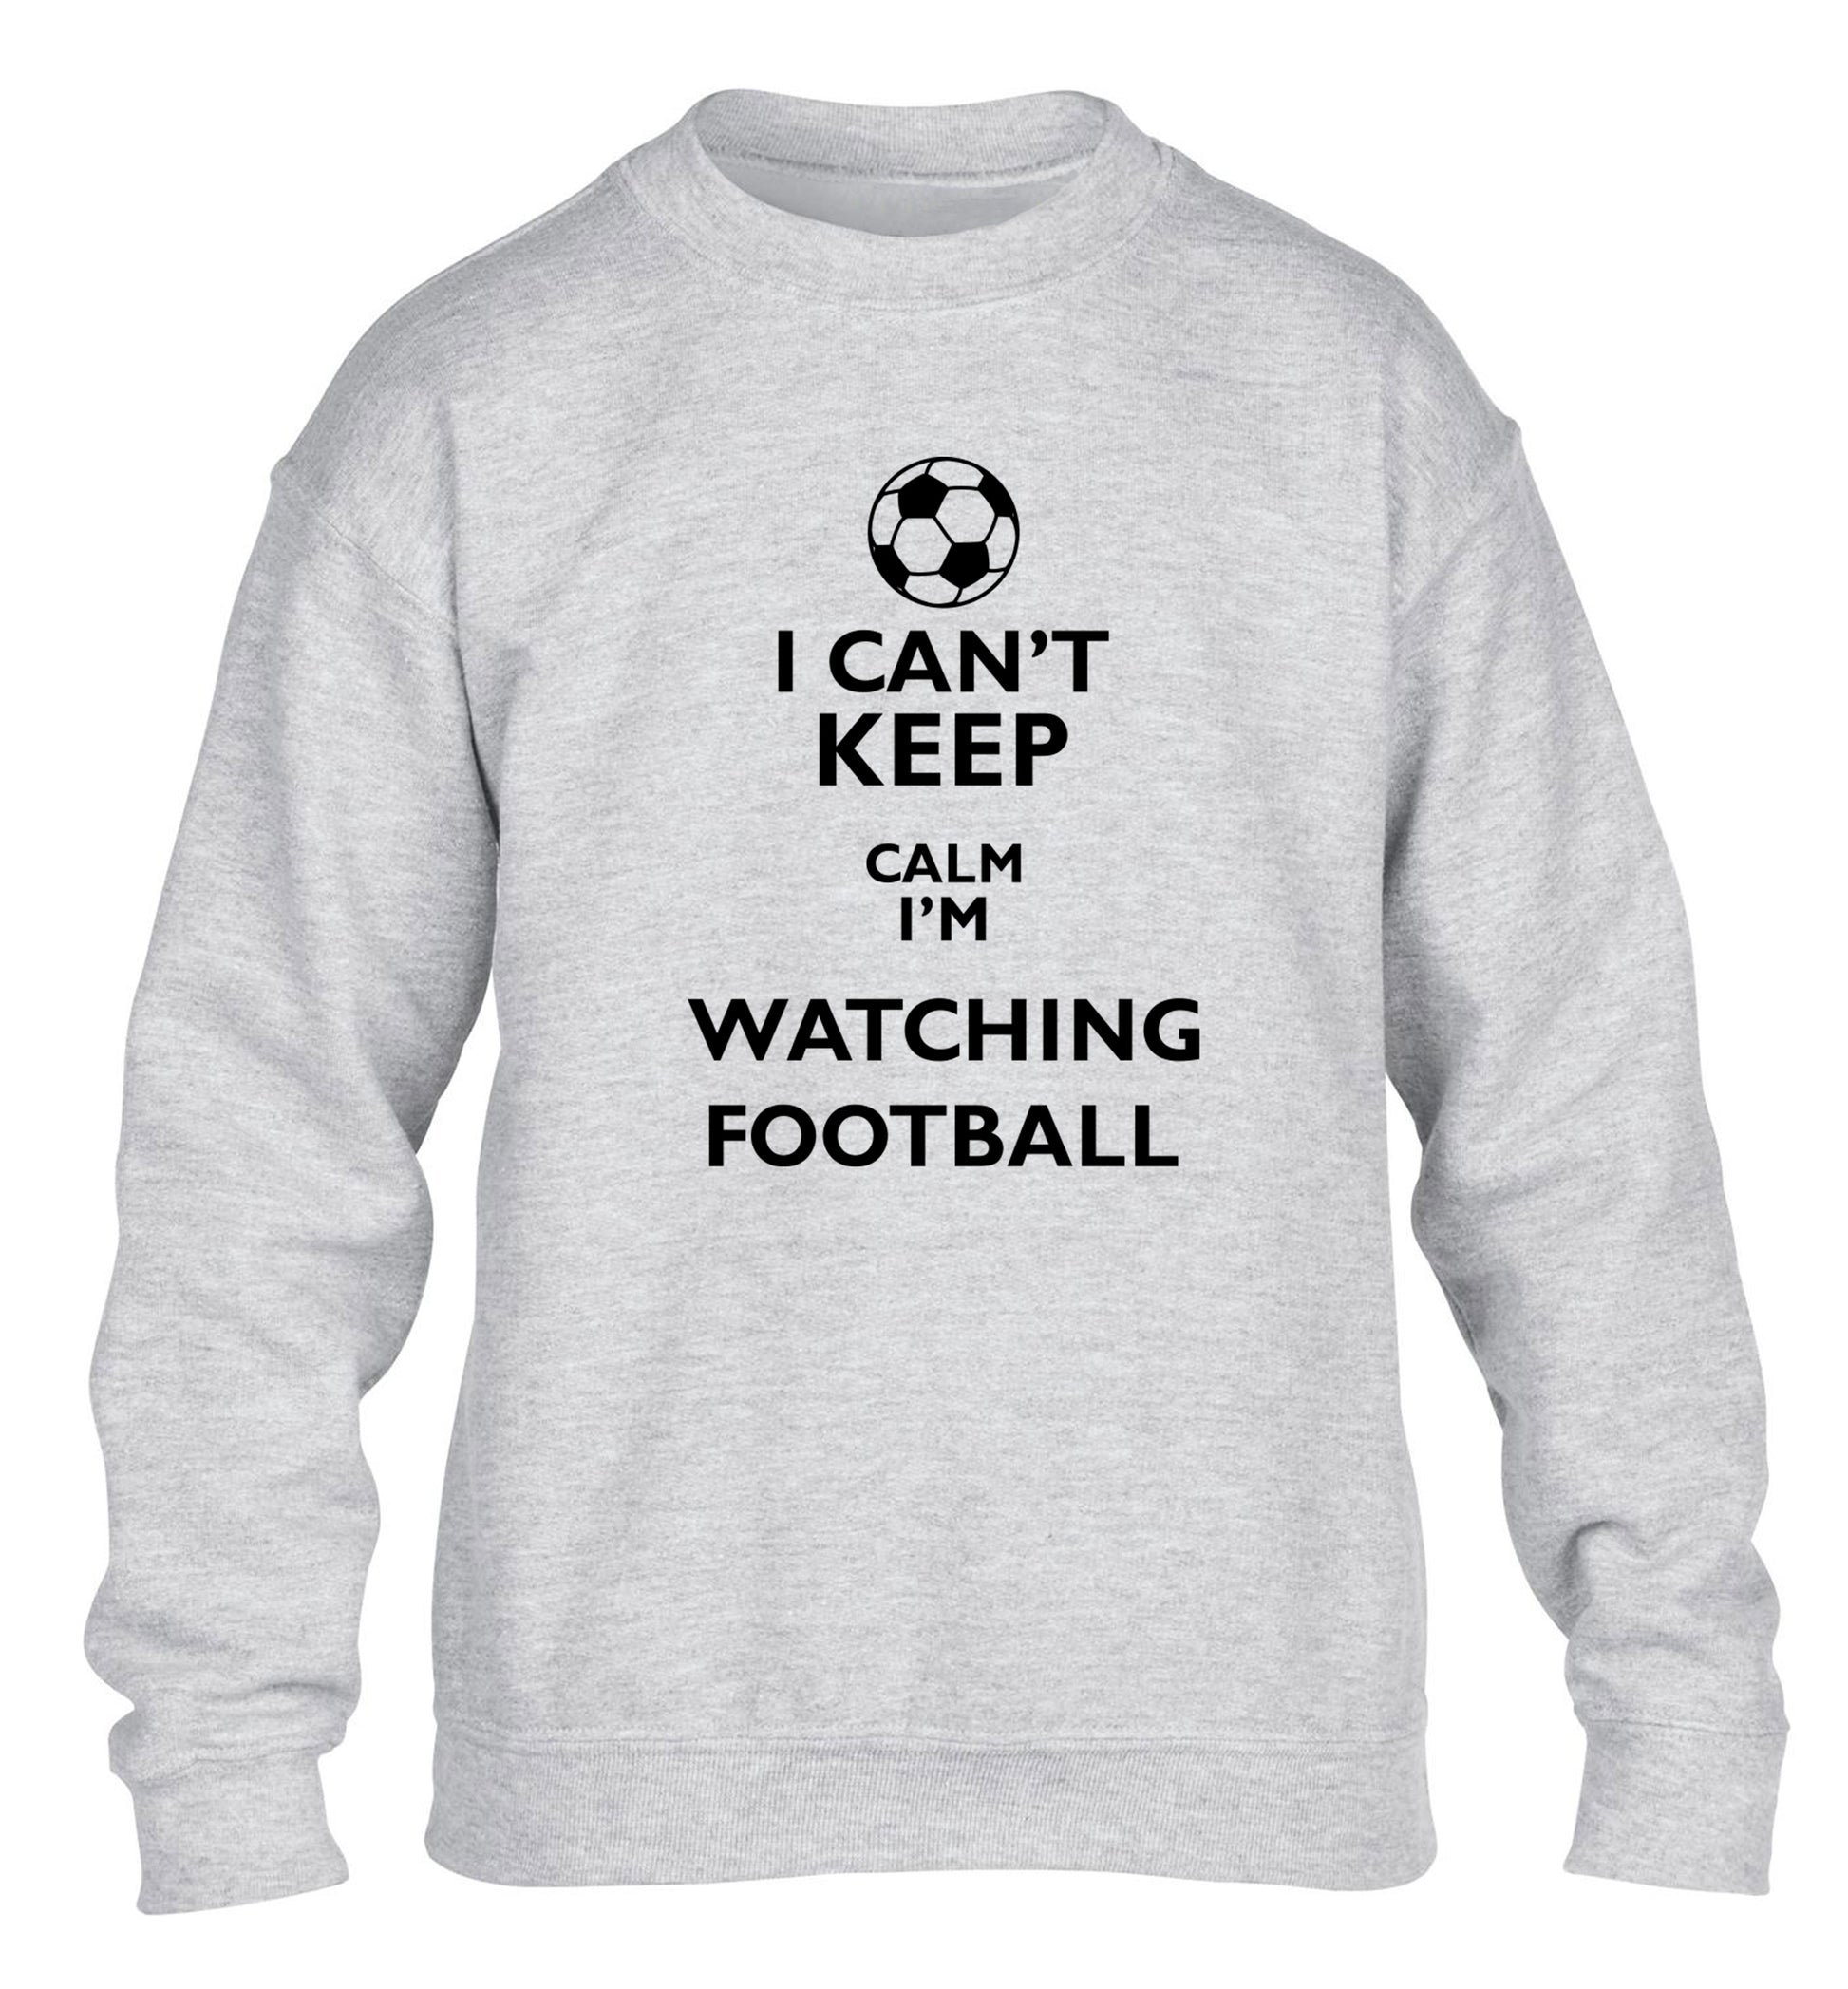 I can't keep calm I'm watching the football children's grey sweater 12-14 Years